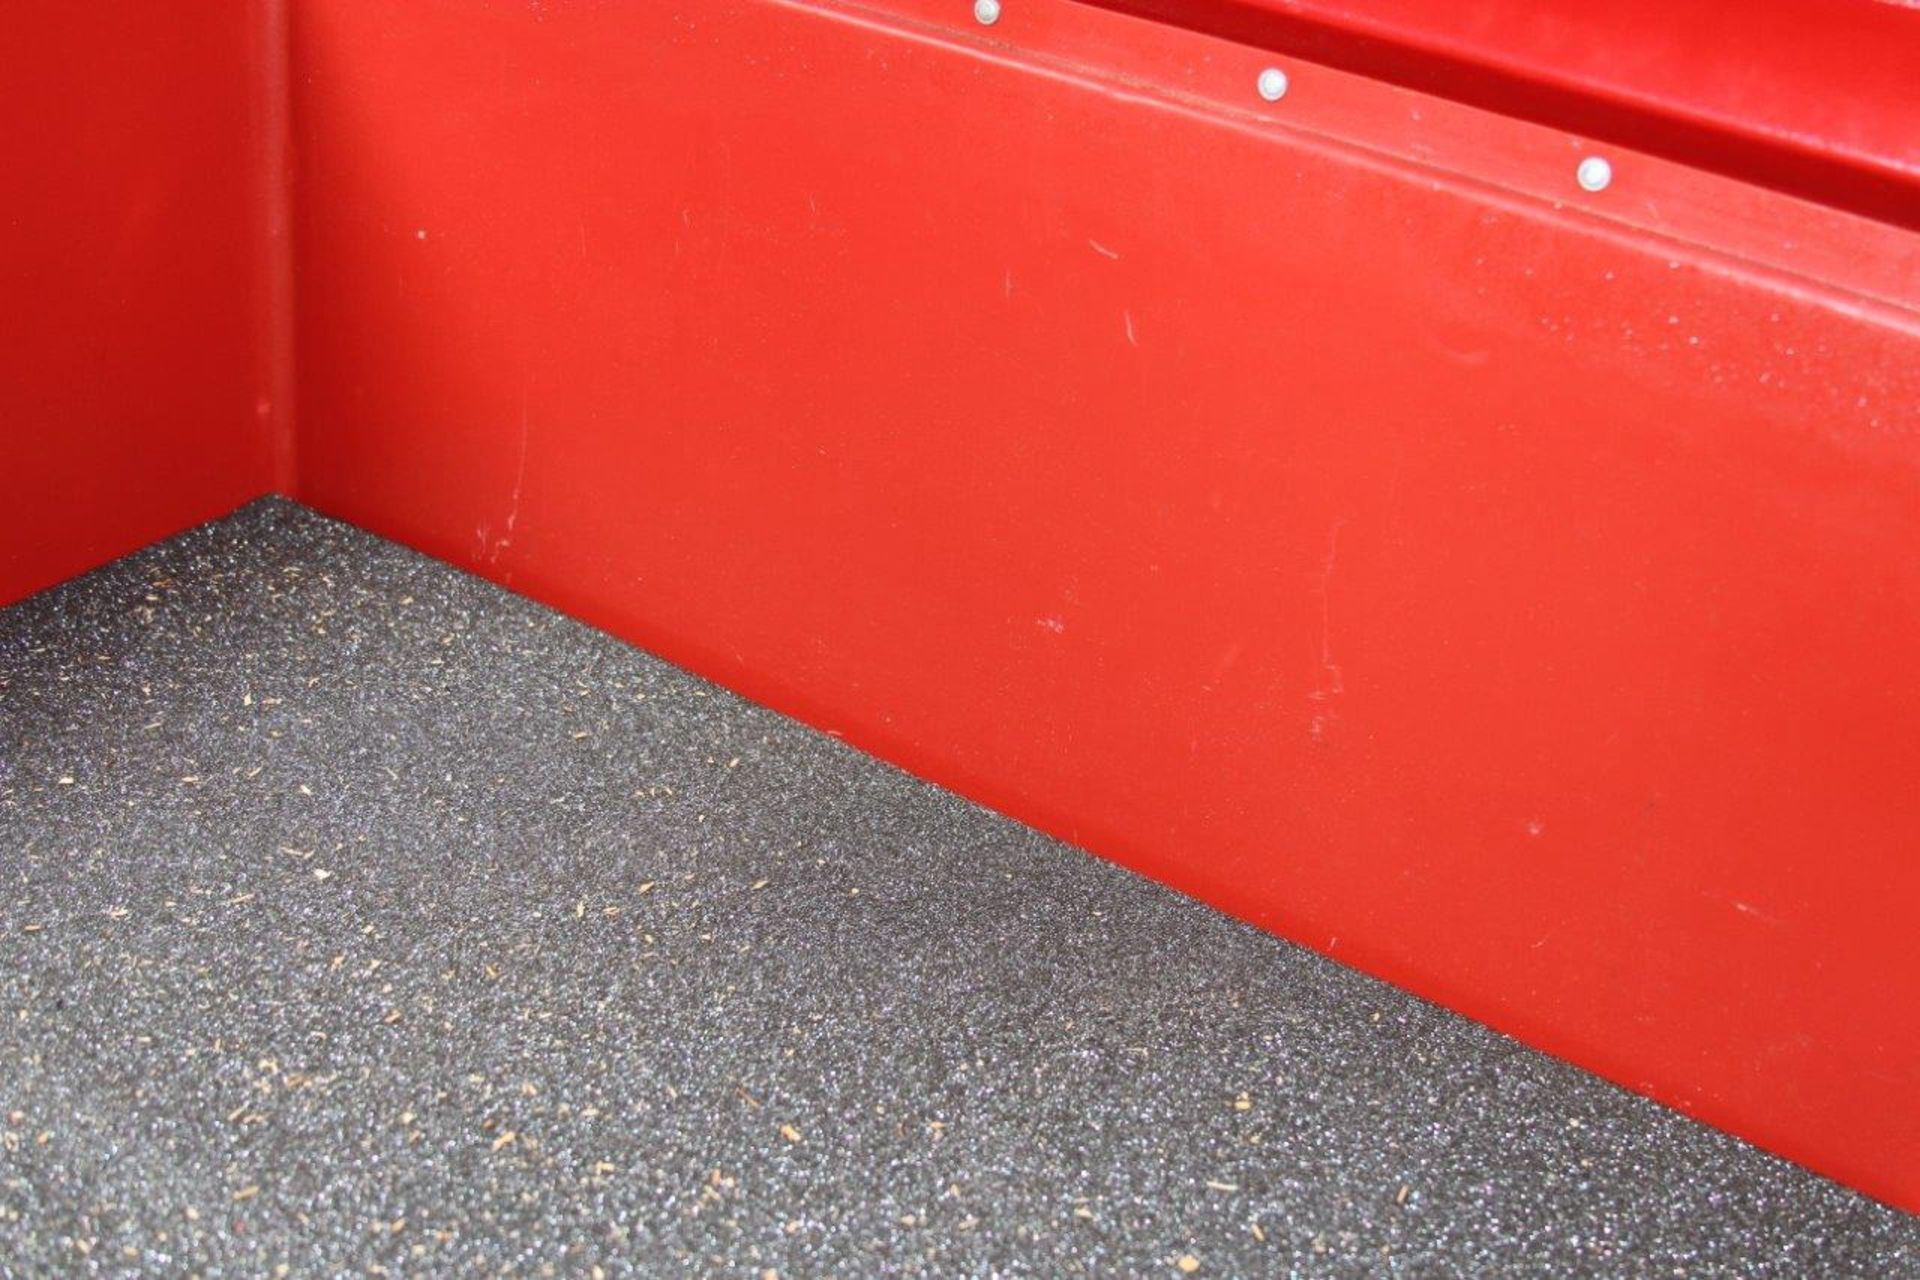 Storage Container, Red Plastic - Image 2 of 2